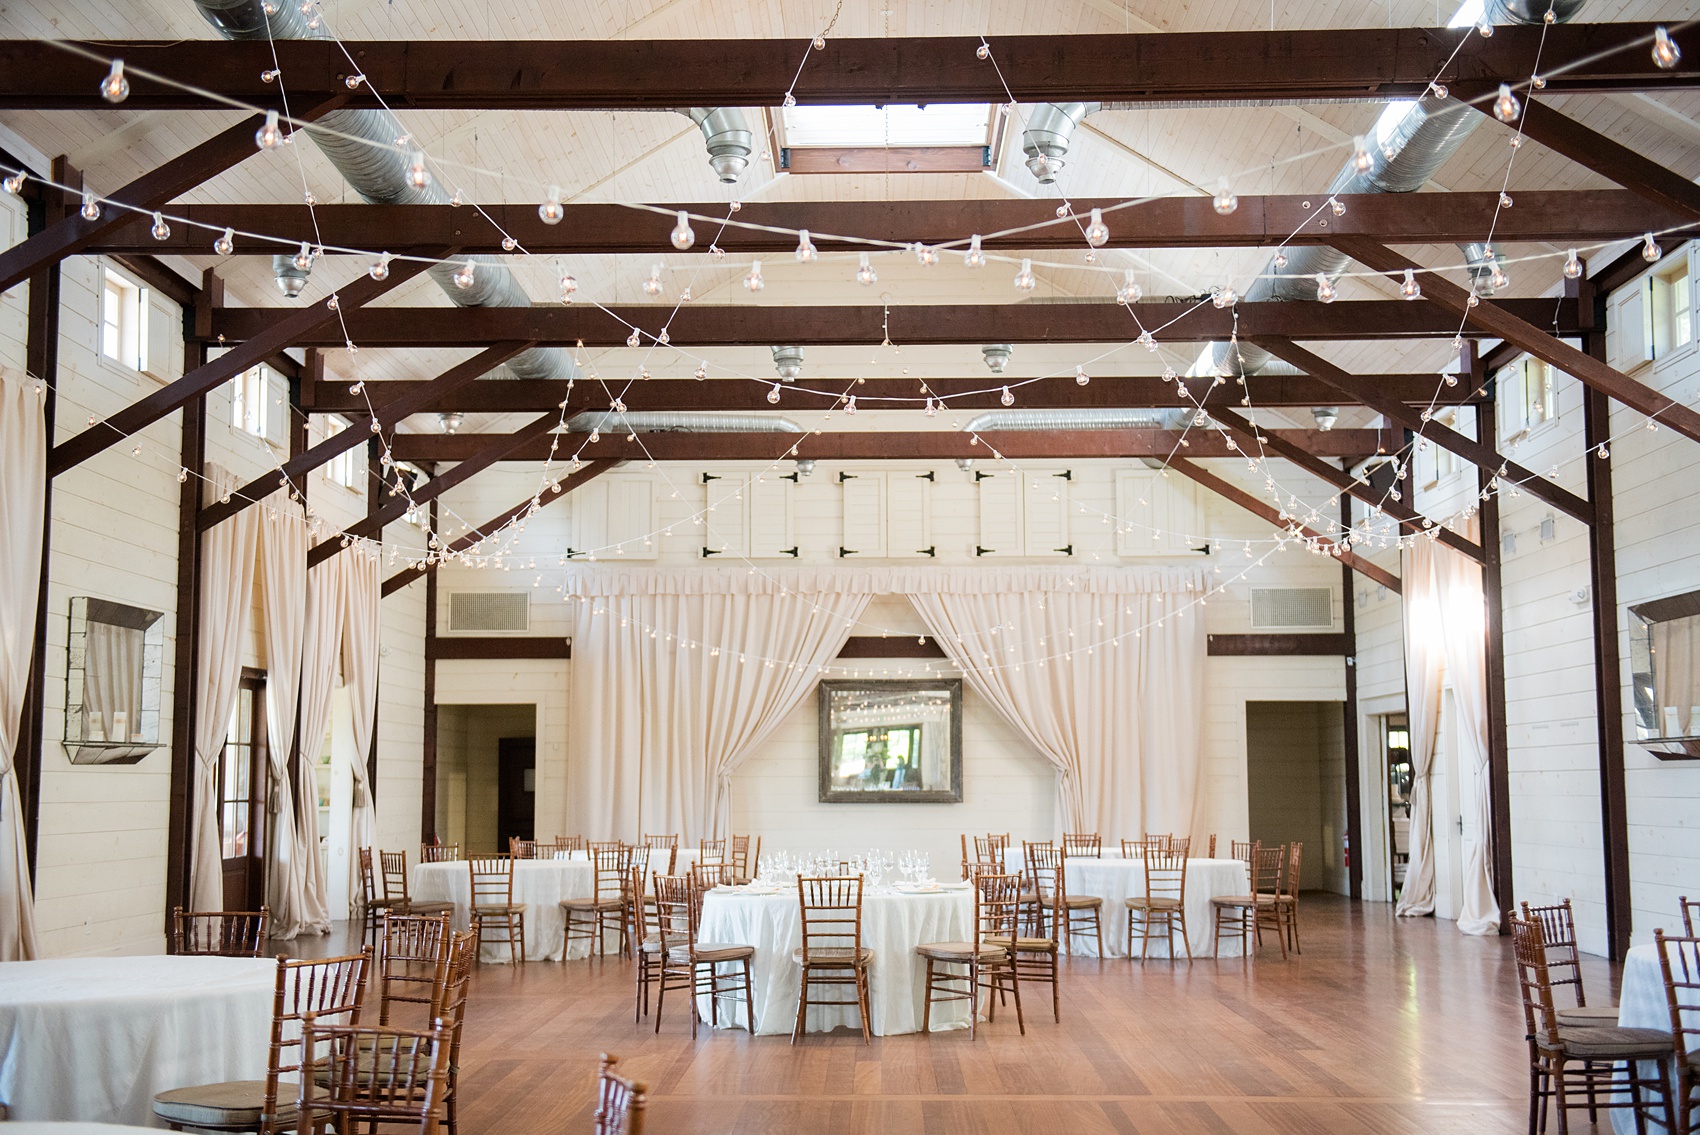 Pippin Hill wedding photos by Mikkel Paige Photography in Charlottesville, Virginia. This chic venue is on a vineyard and has beautiful views of the Blue Ridge Mountains. The white washed reception area is beautiful with string lights. Click through for more images from this venue! #VirginiaWeddingVenues #PippinHill #VineyardWedding #CharlottesvilleVA #RatherbeinCville